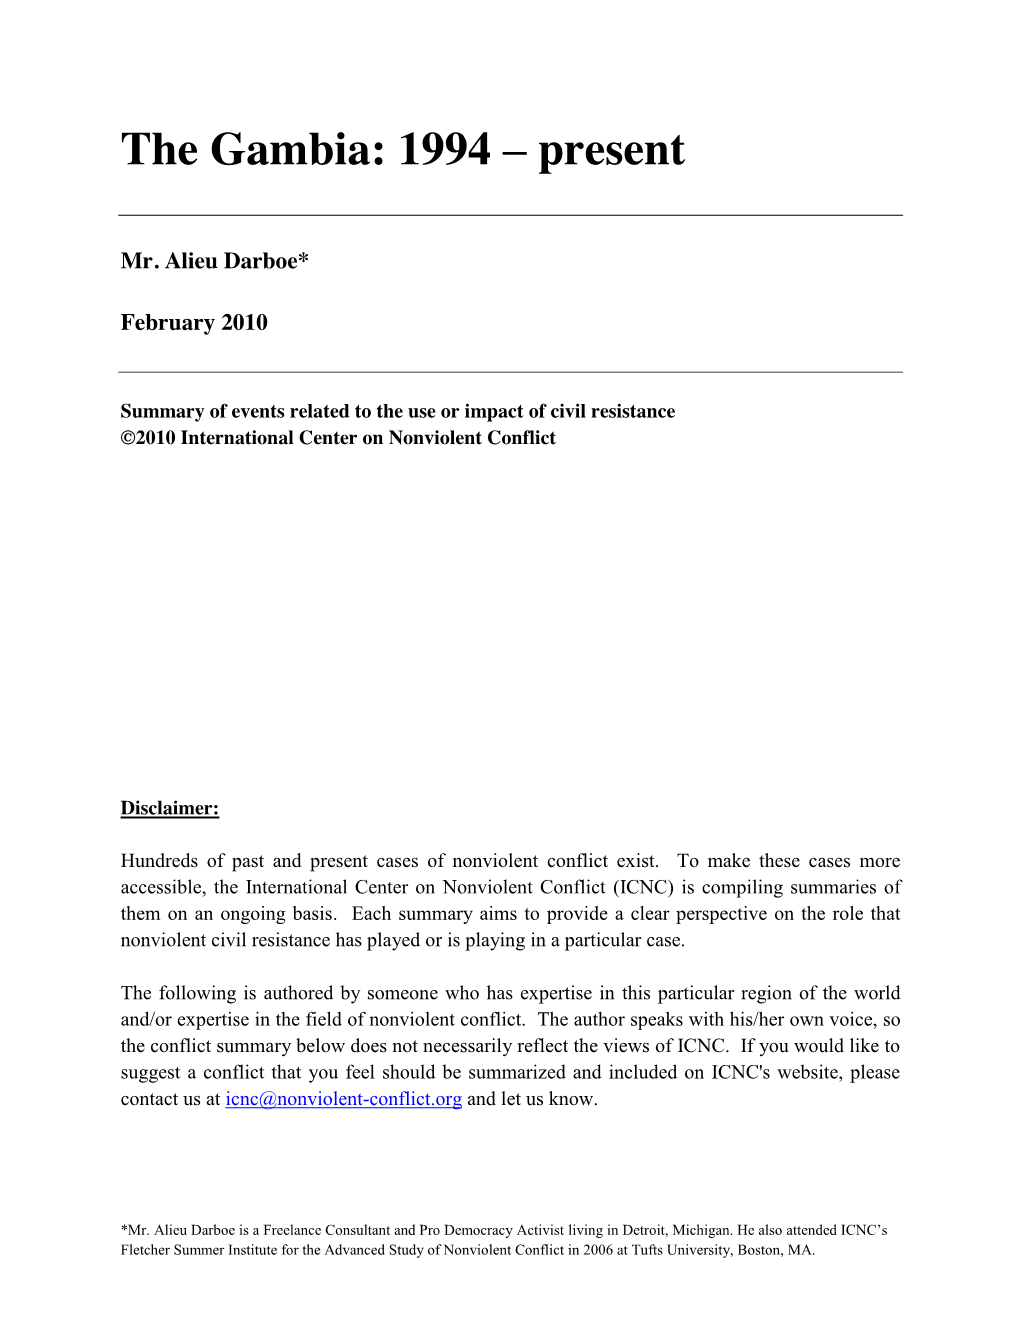 The Gambia: 1994 – Present